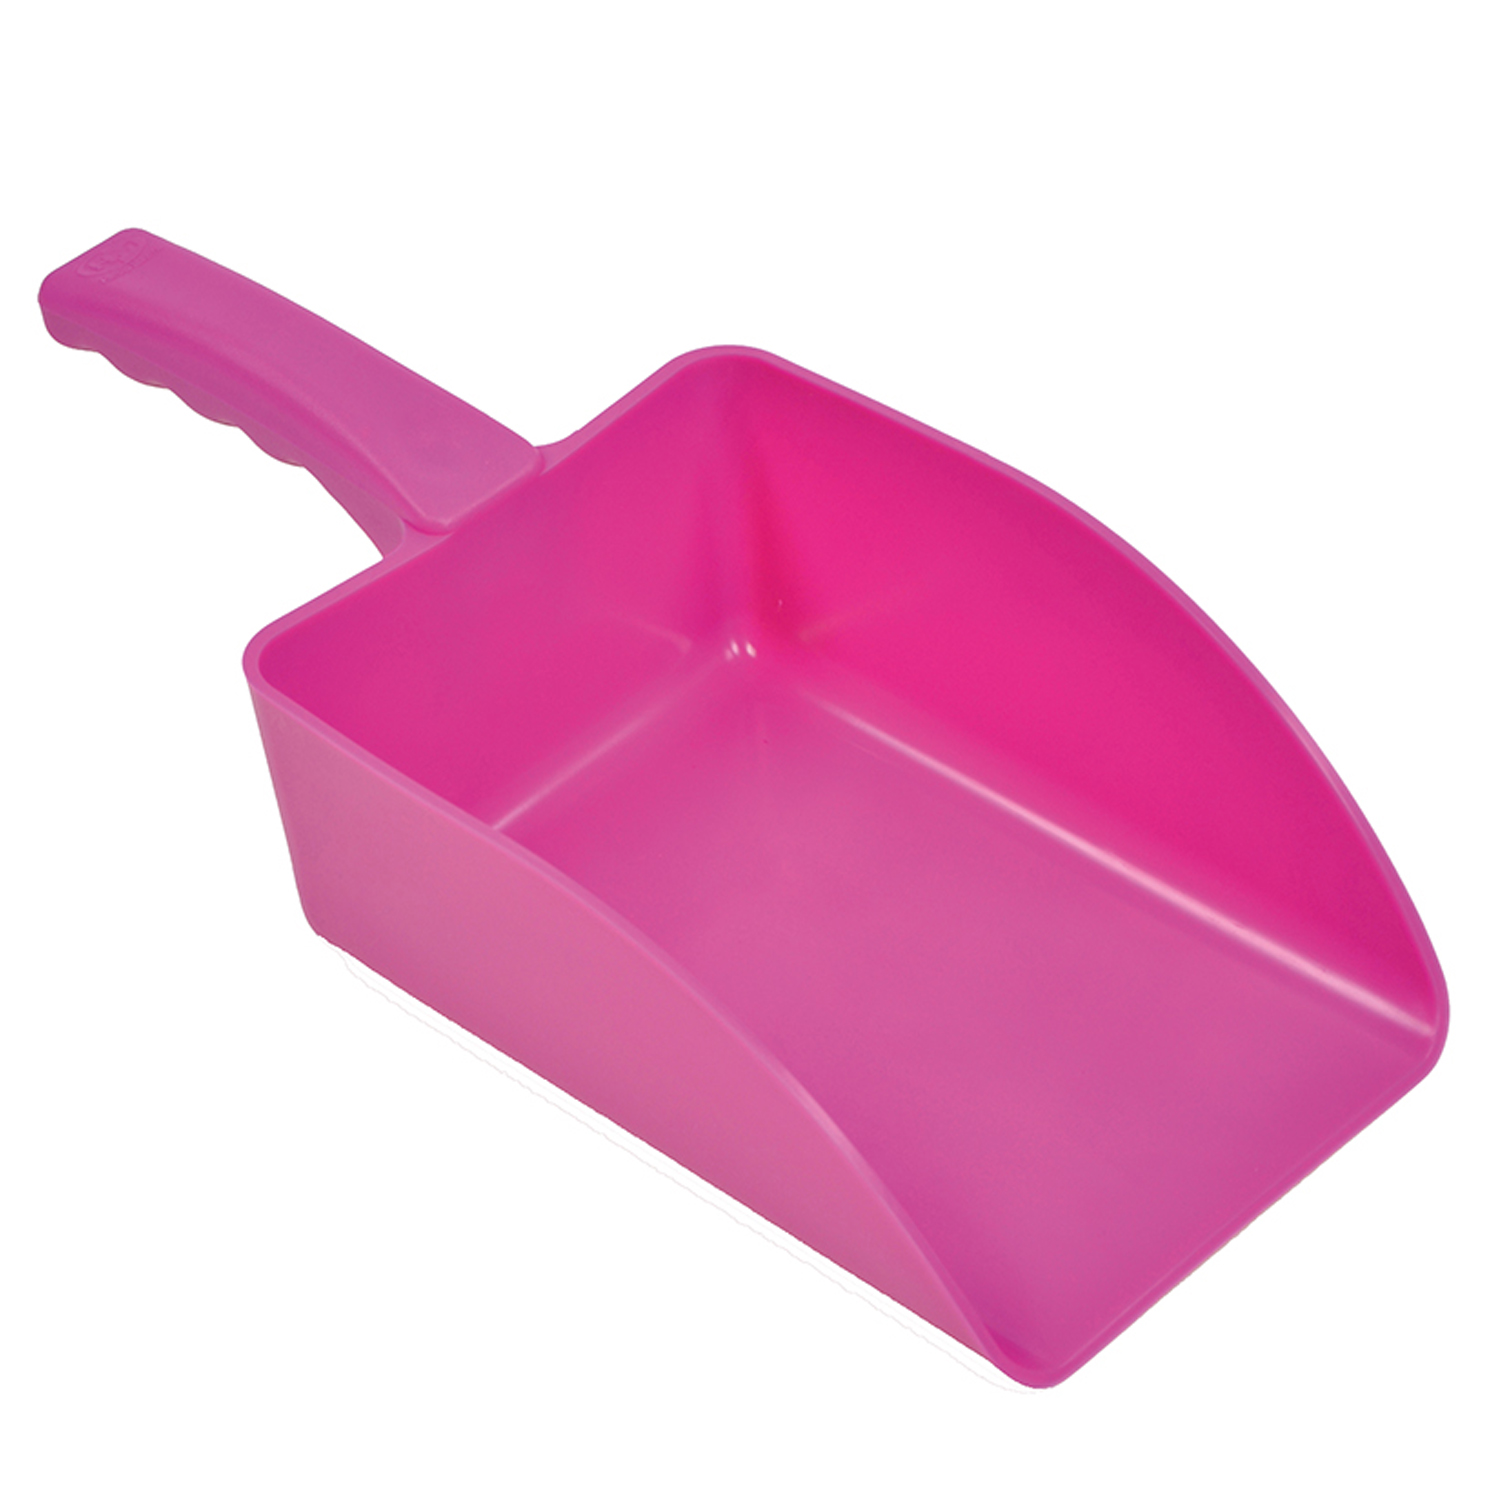 HAROLD MOORE HAND SCOOP SMALL PINK SMALL